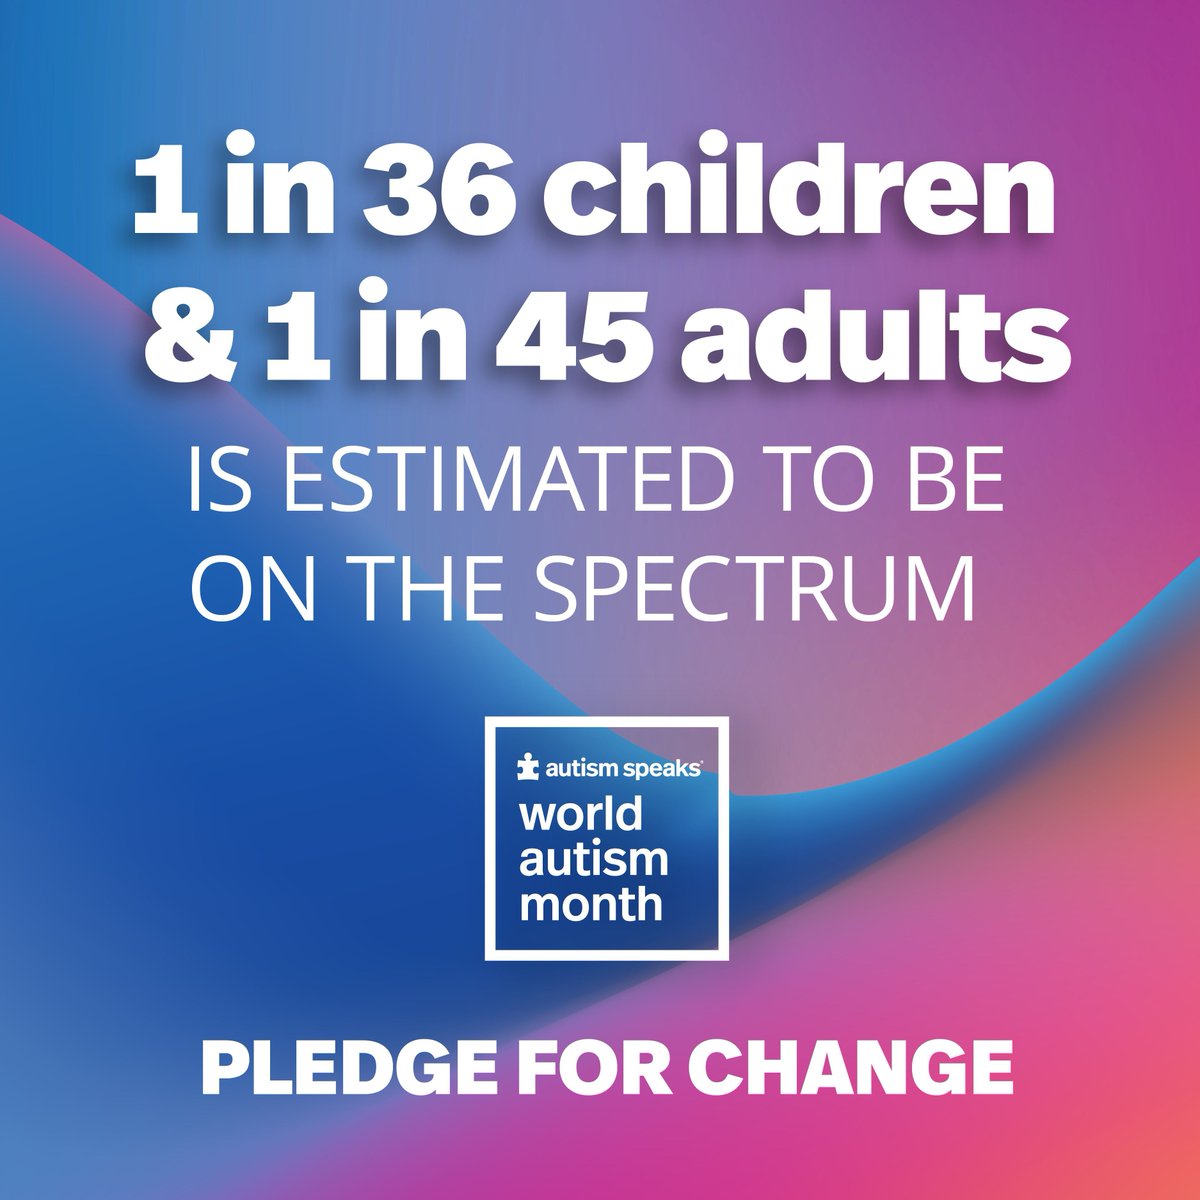 We are supporting #WorldAutismMonth. Pledge your support to act fearlessly for change for a more accepting and inclusive world for people with autism.